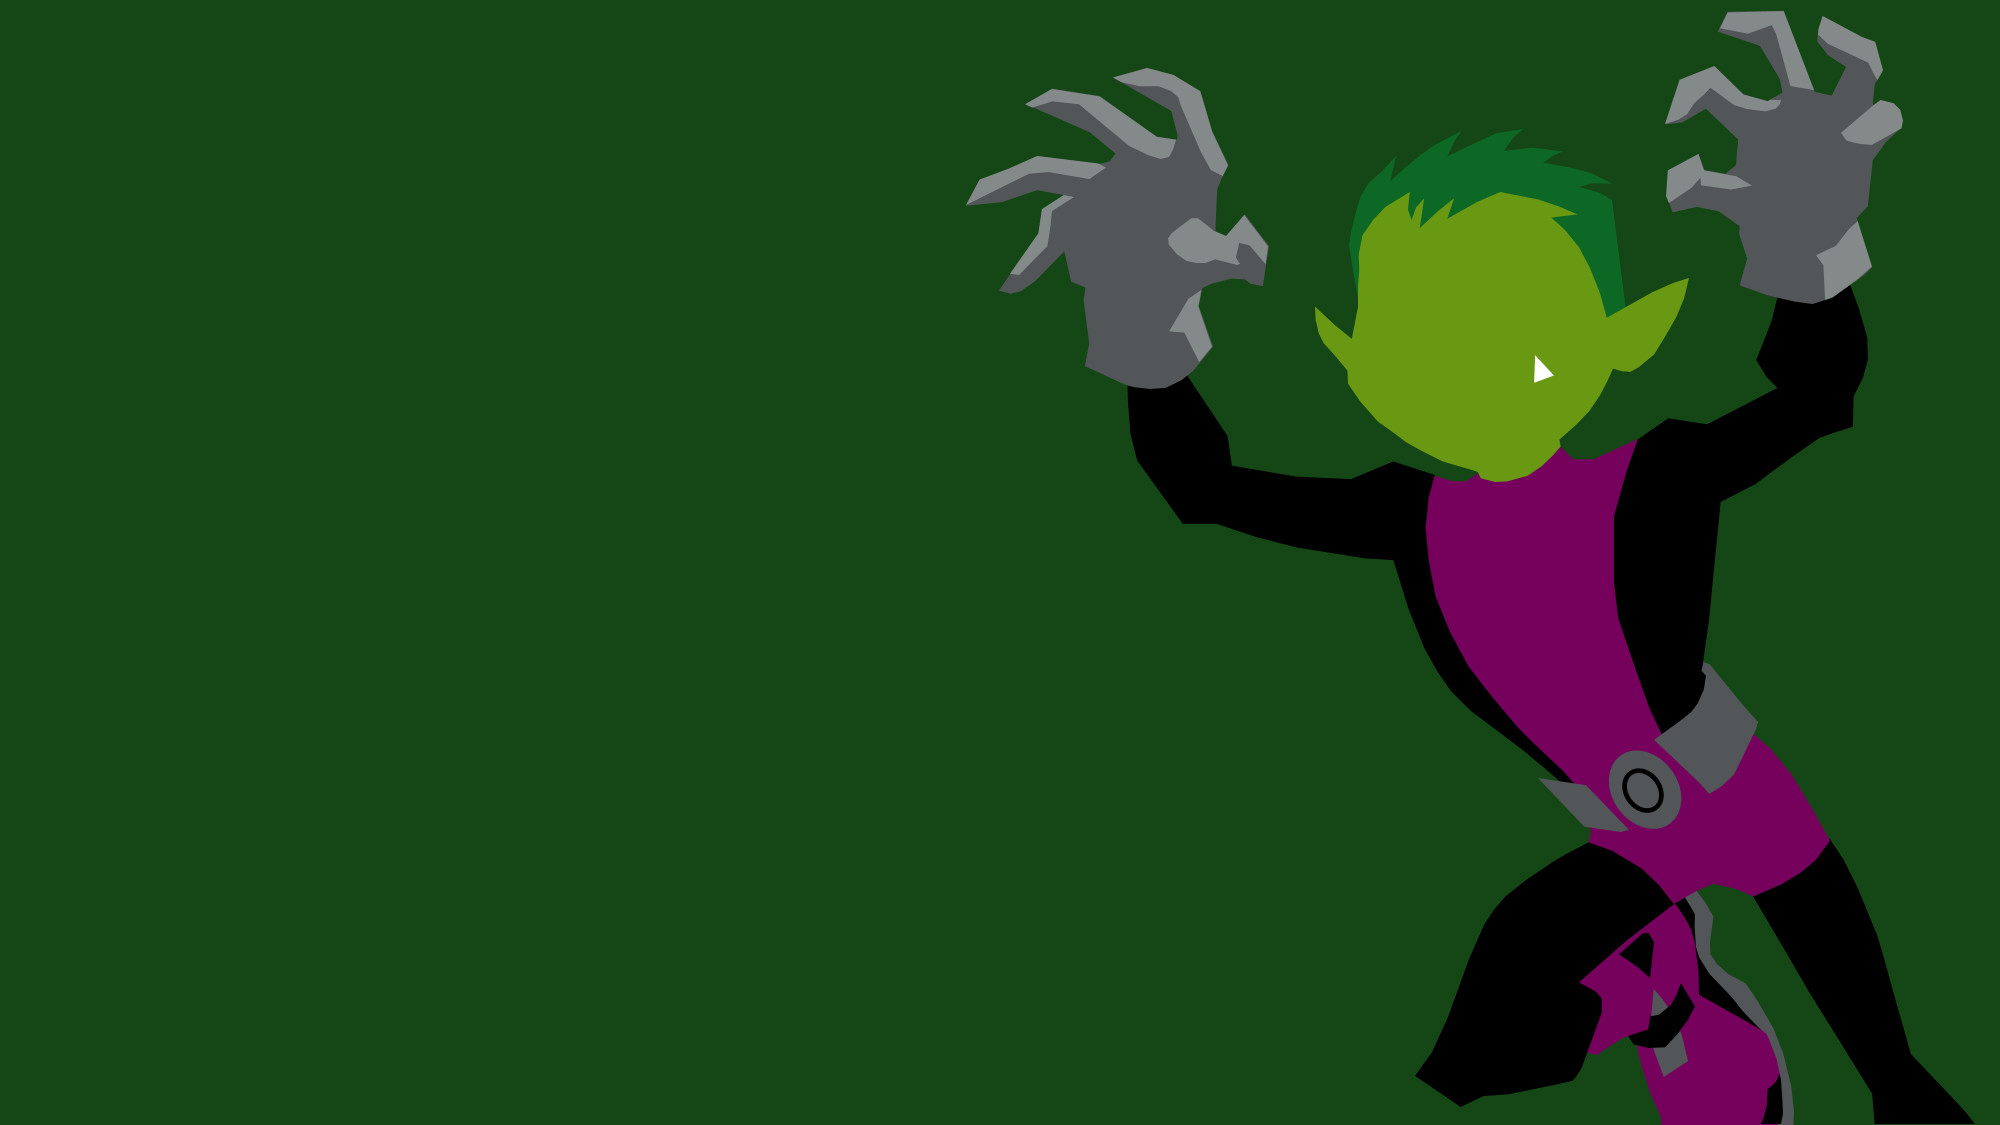 2000x1125 ... Beast Boy from Teen Titans by Reverendtundra